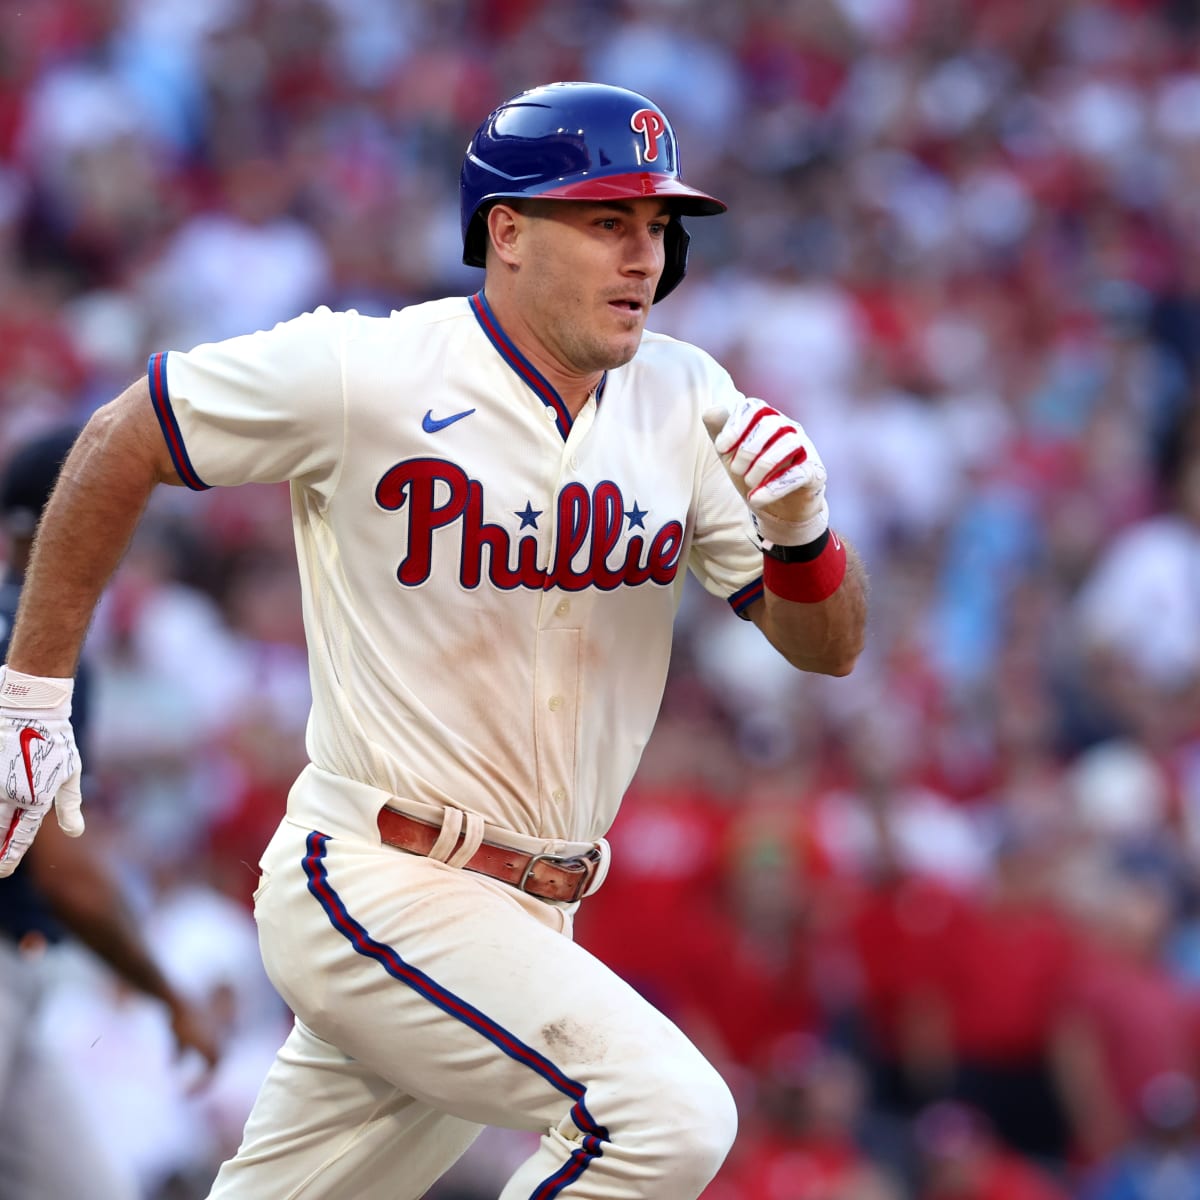 Phillies catcher J.T. Realmuto wins Gold Glove Award  Phillies Nation -  Your source for Philadelphia Phillies news, opinion, history, rumors,  events, and other fun stuff.